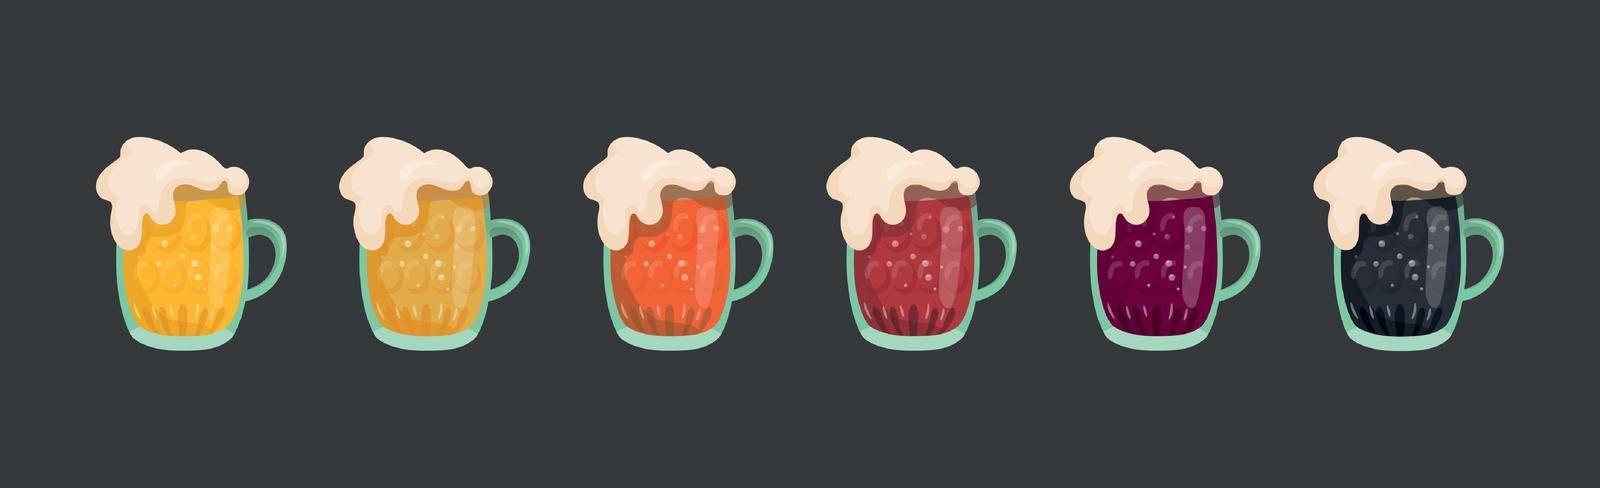 Set of 6 mugs of different types of beer - Vector illustration